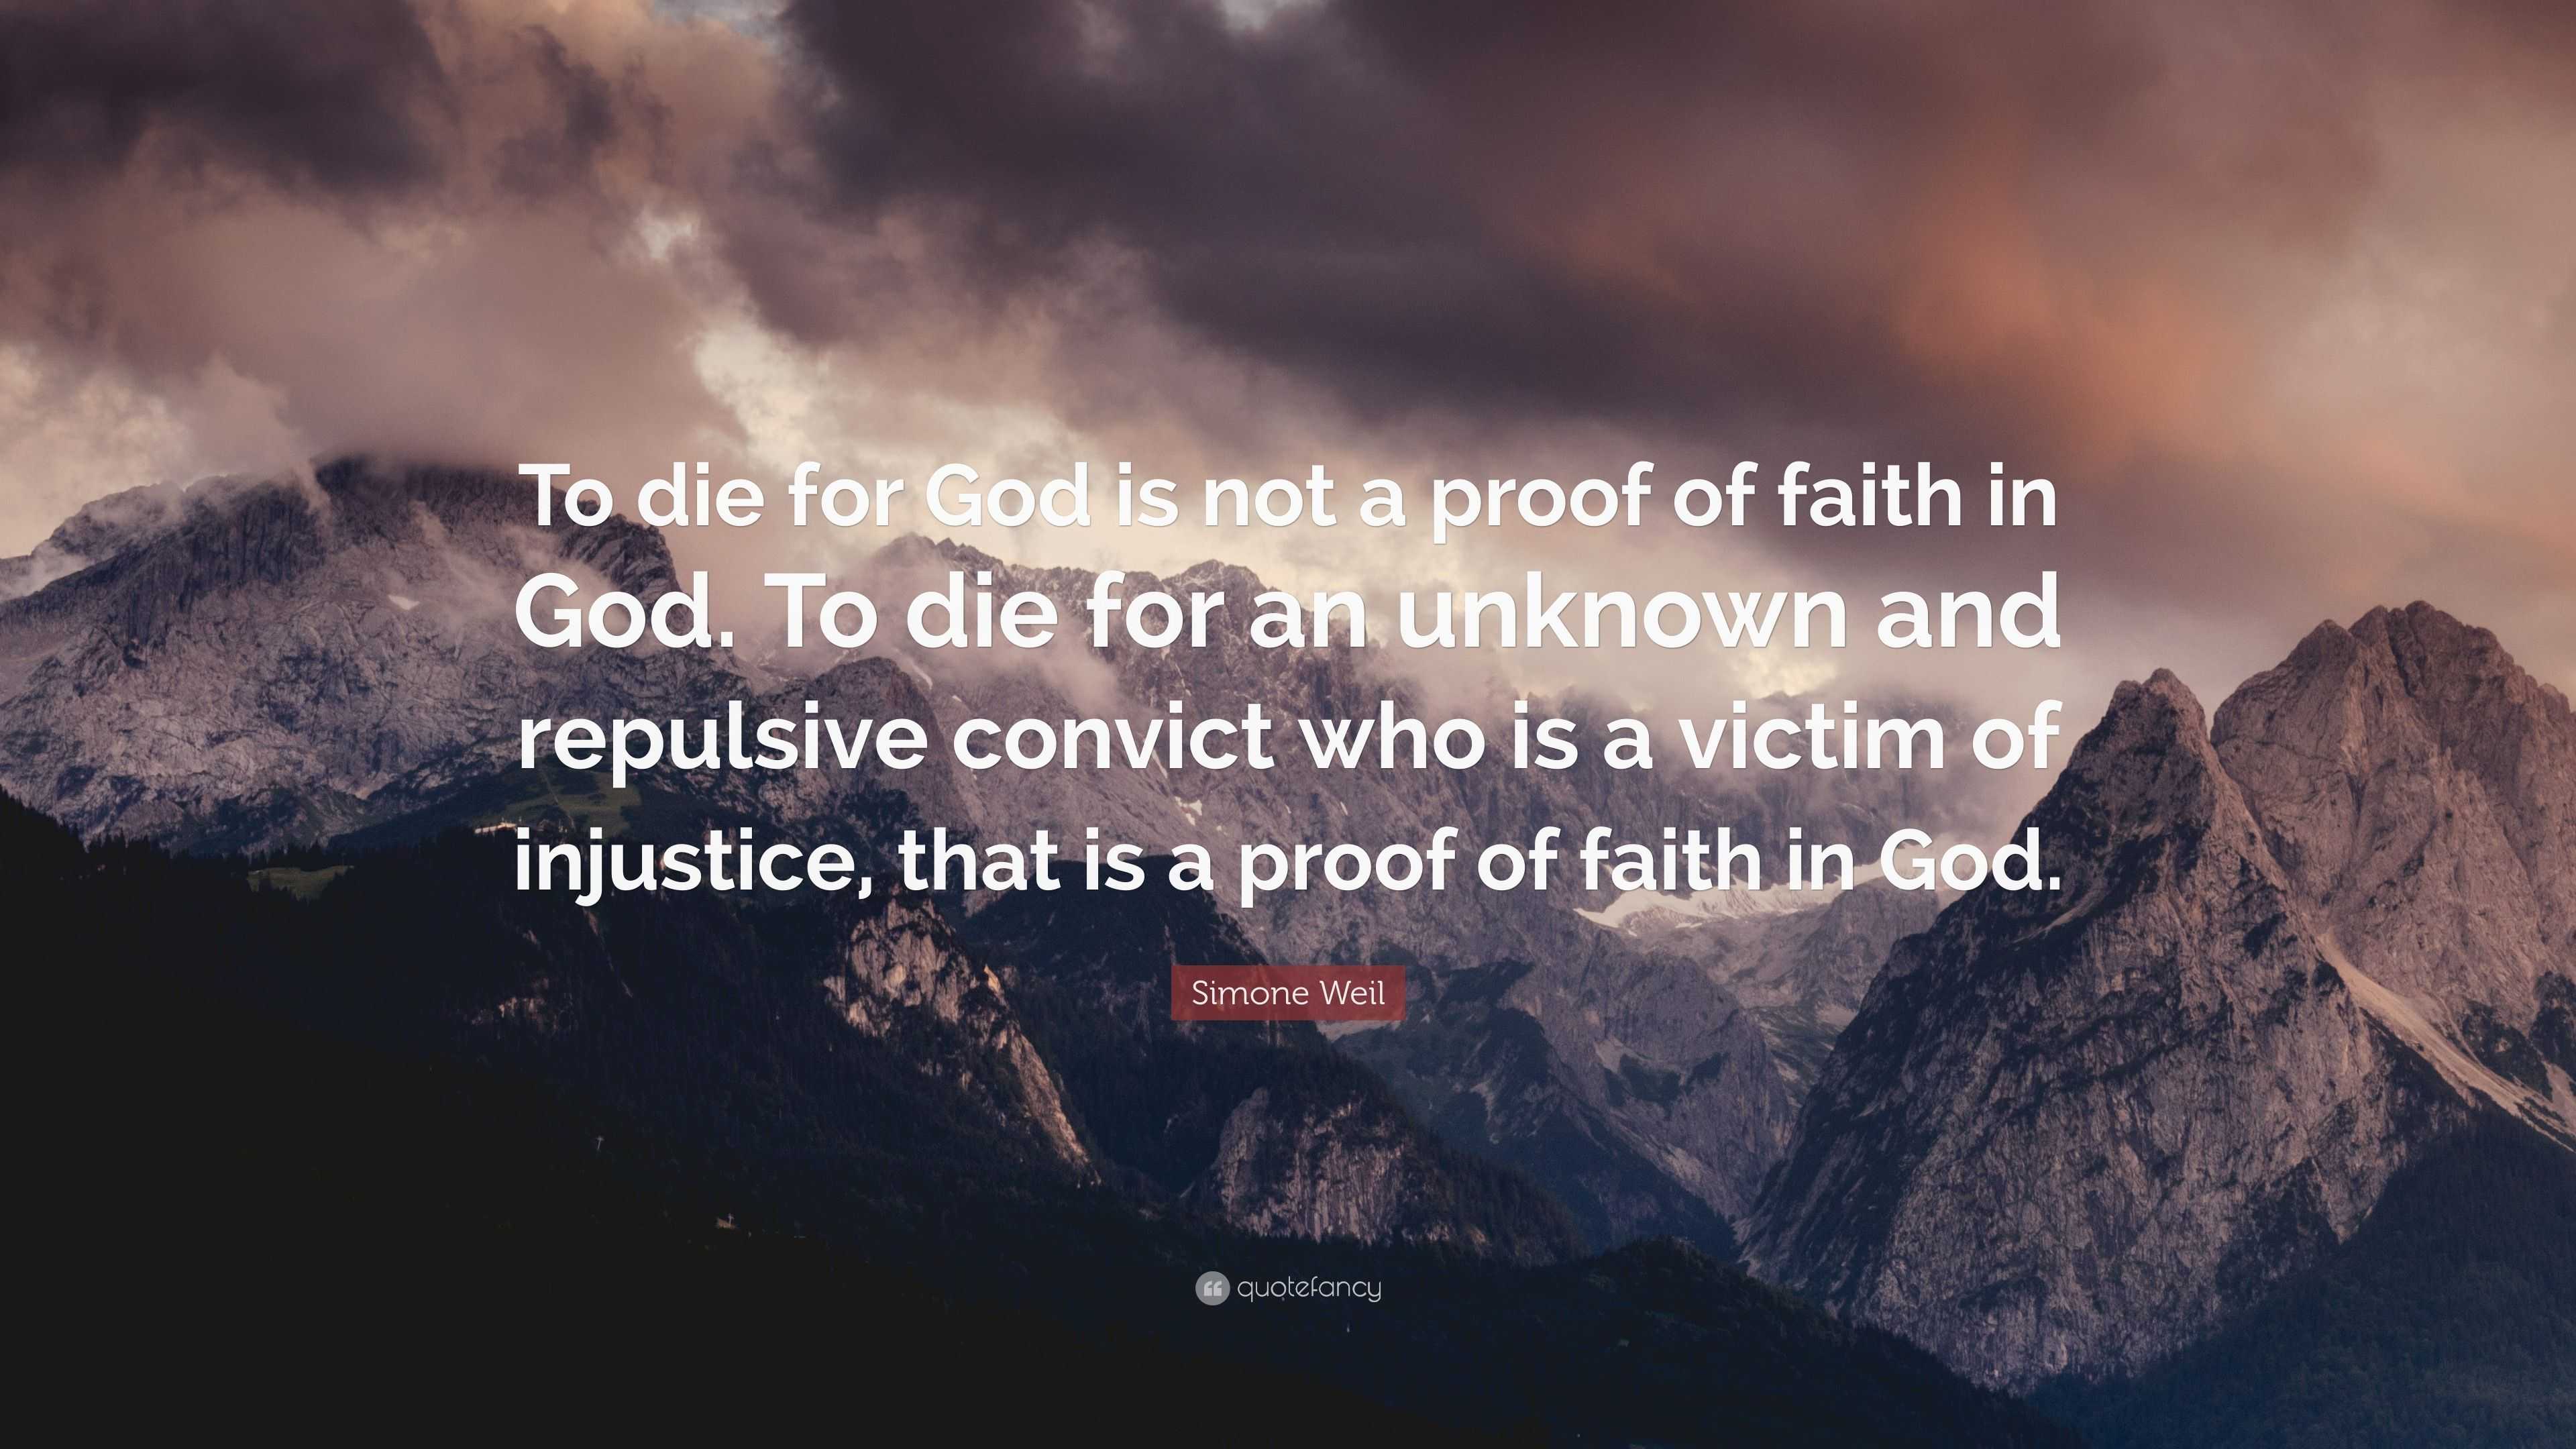 Simone Weil Quote To Die For God Is Not A Proof Of Faith - 